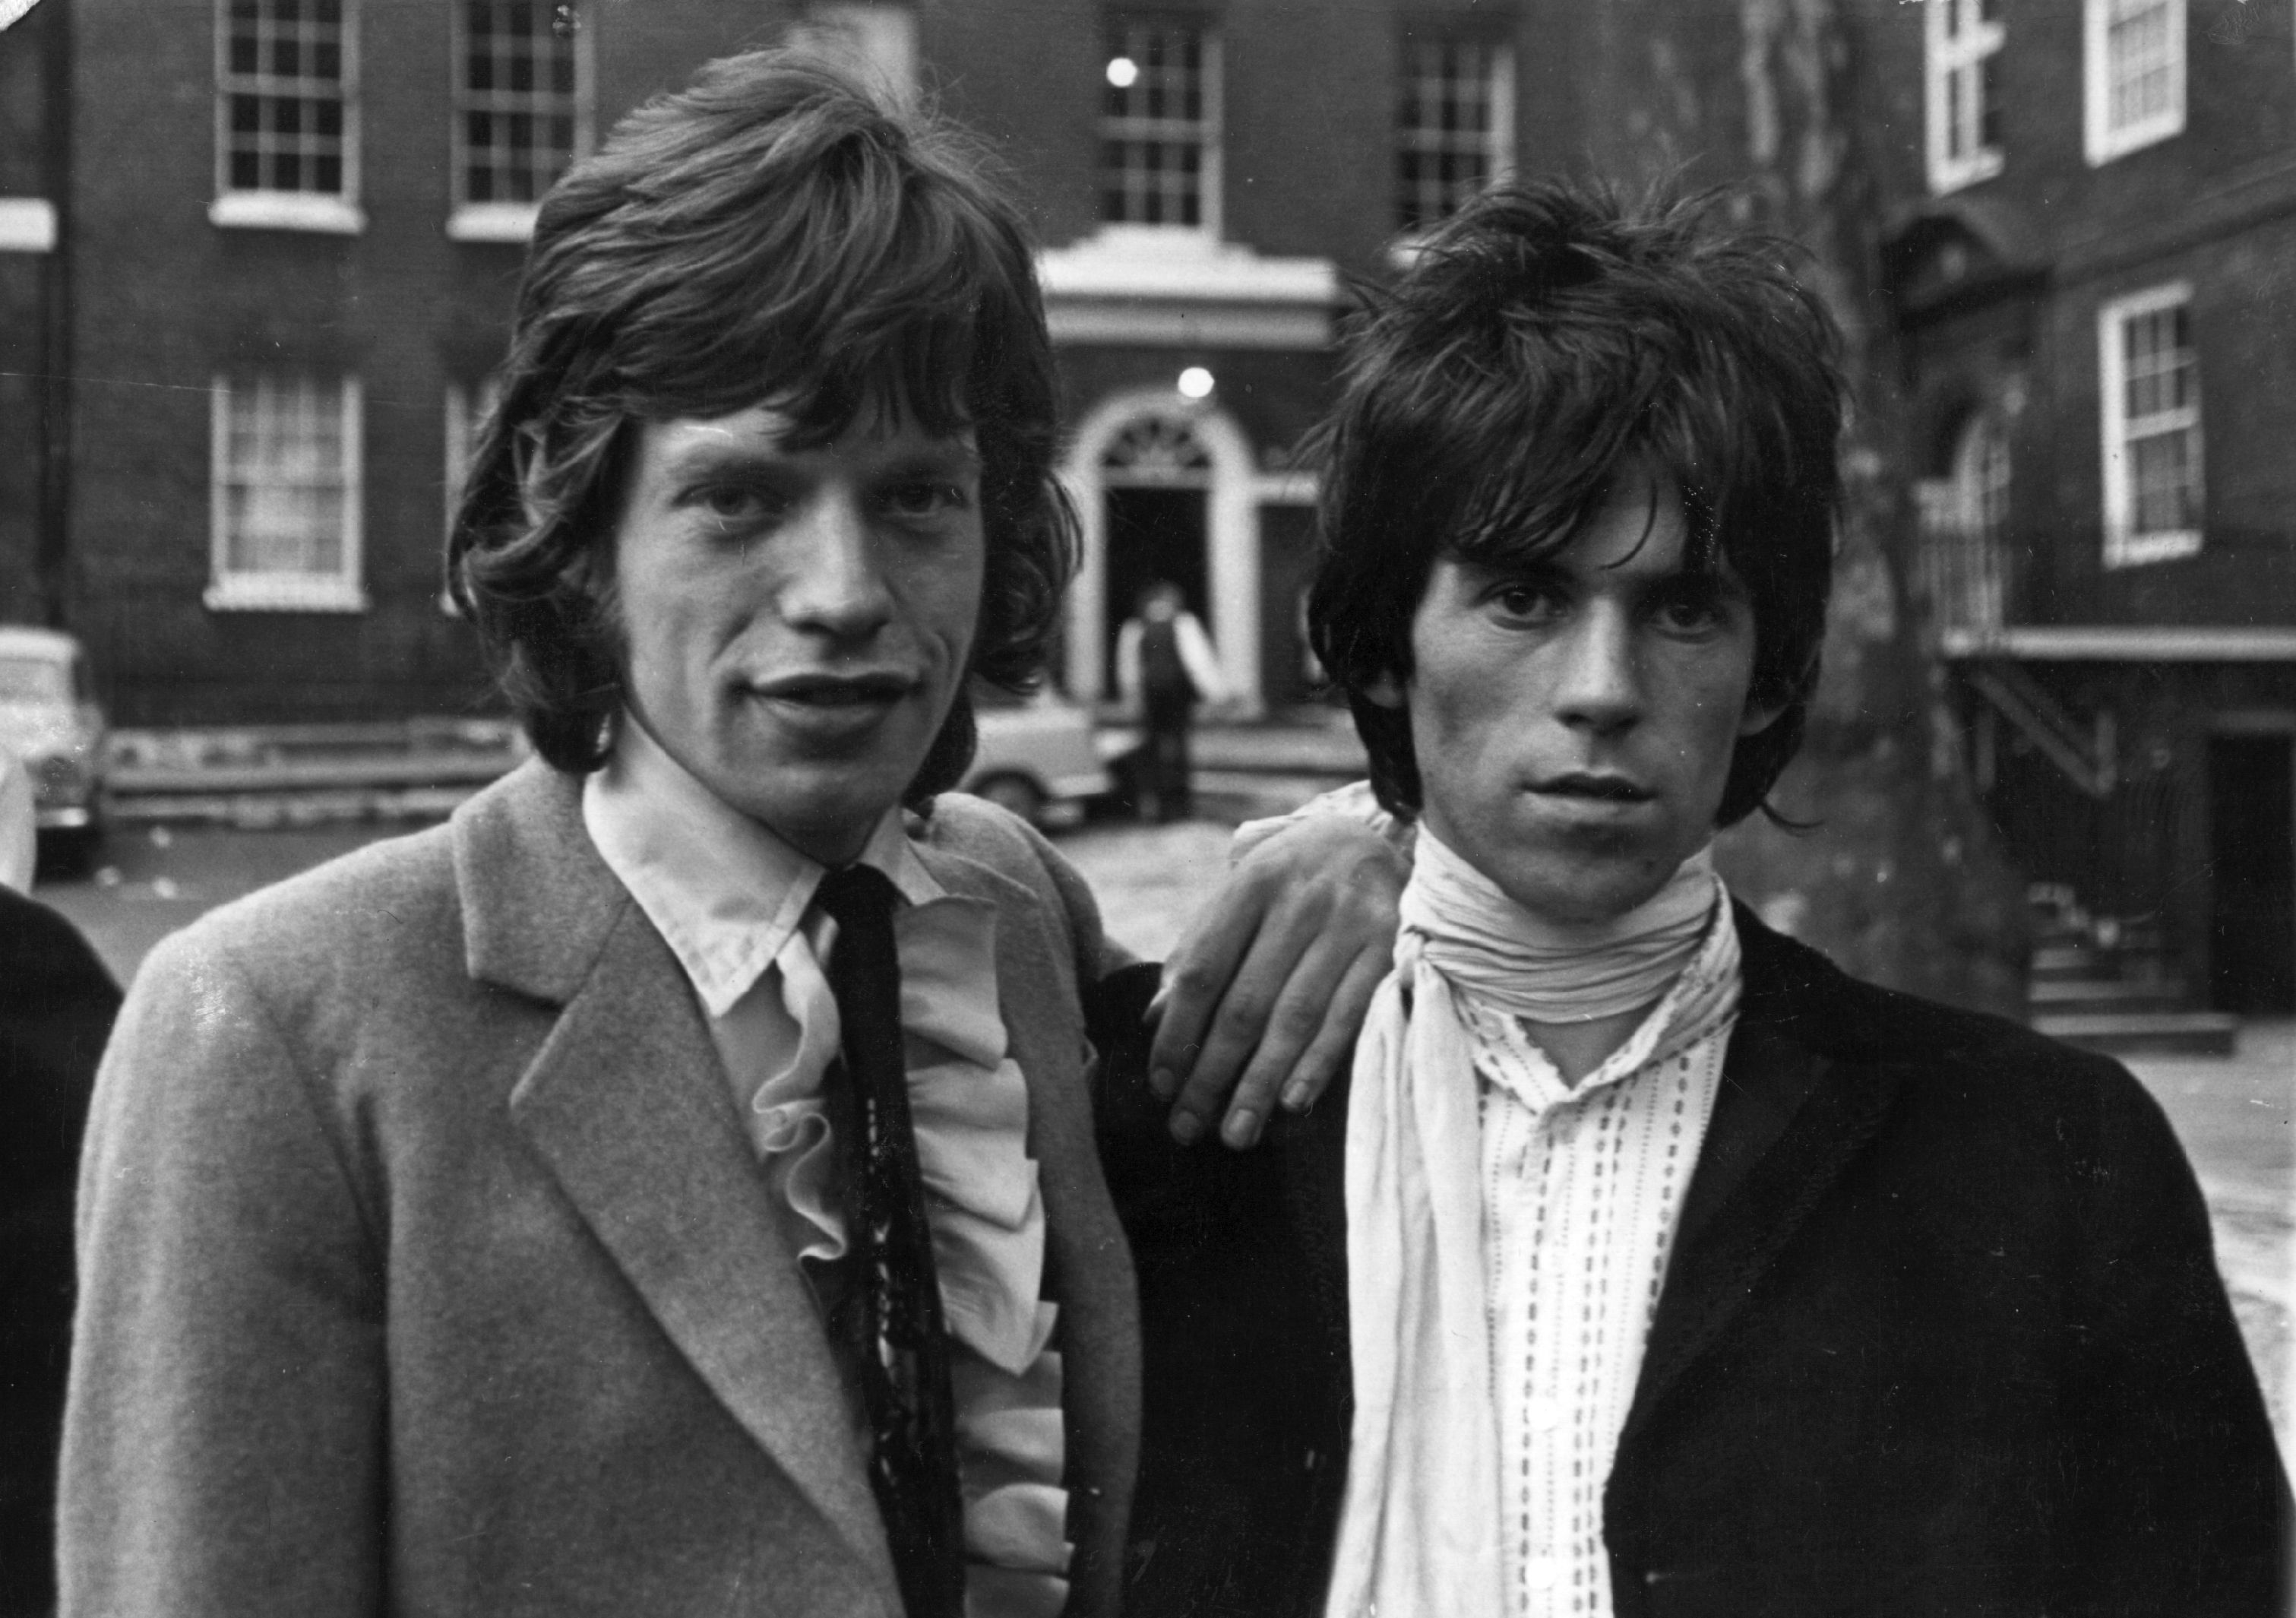 The Rolling Stones' Mick Jagger putting his hand on Keith Richards